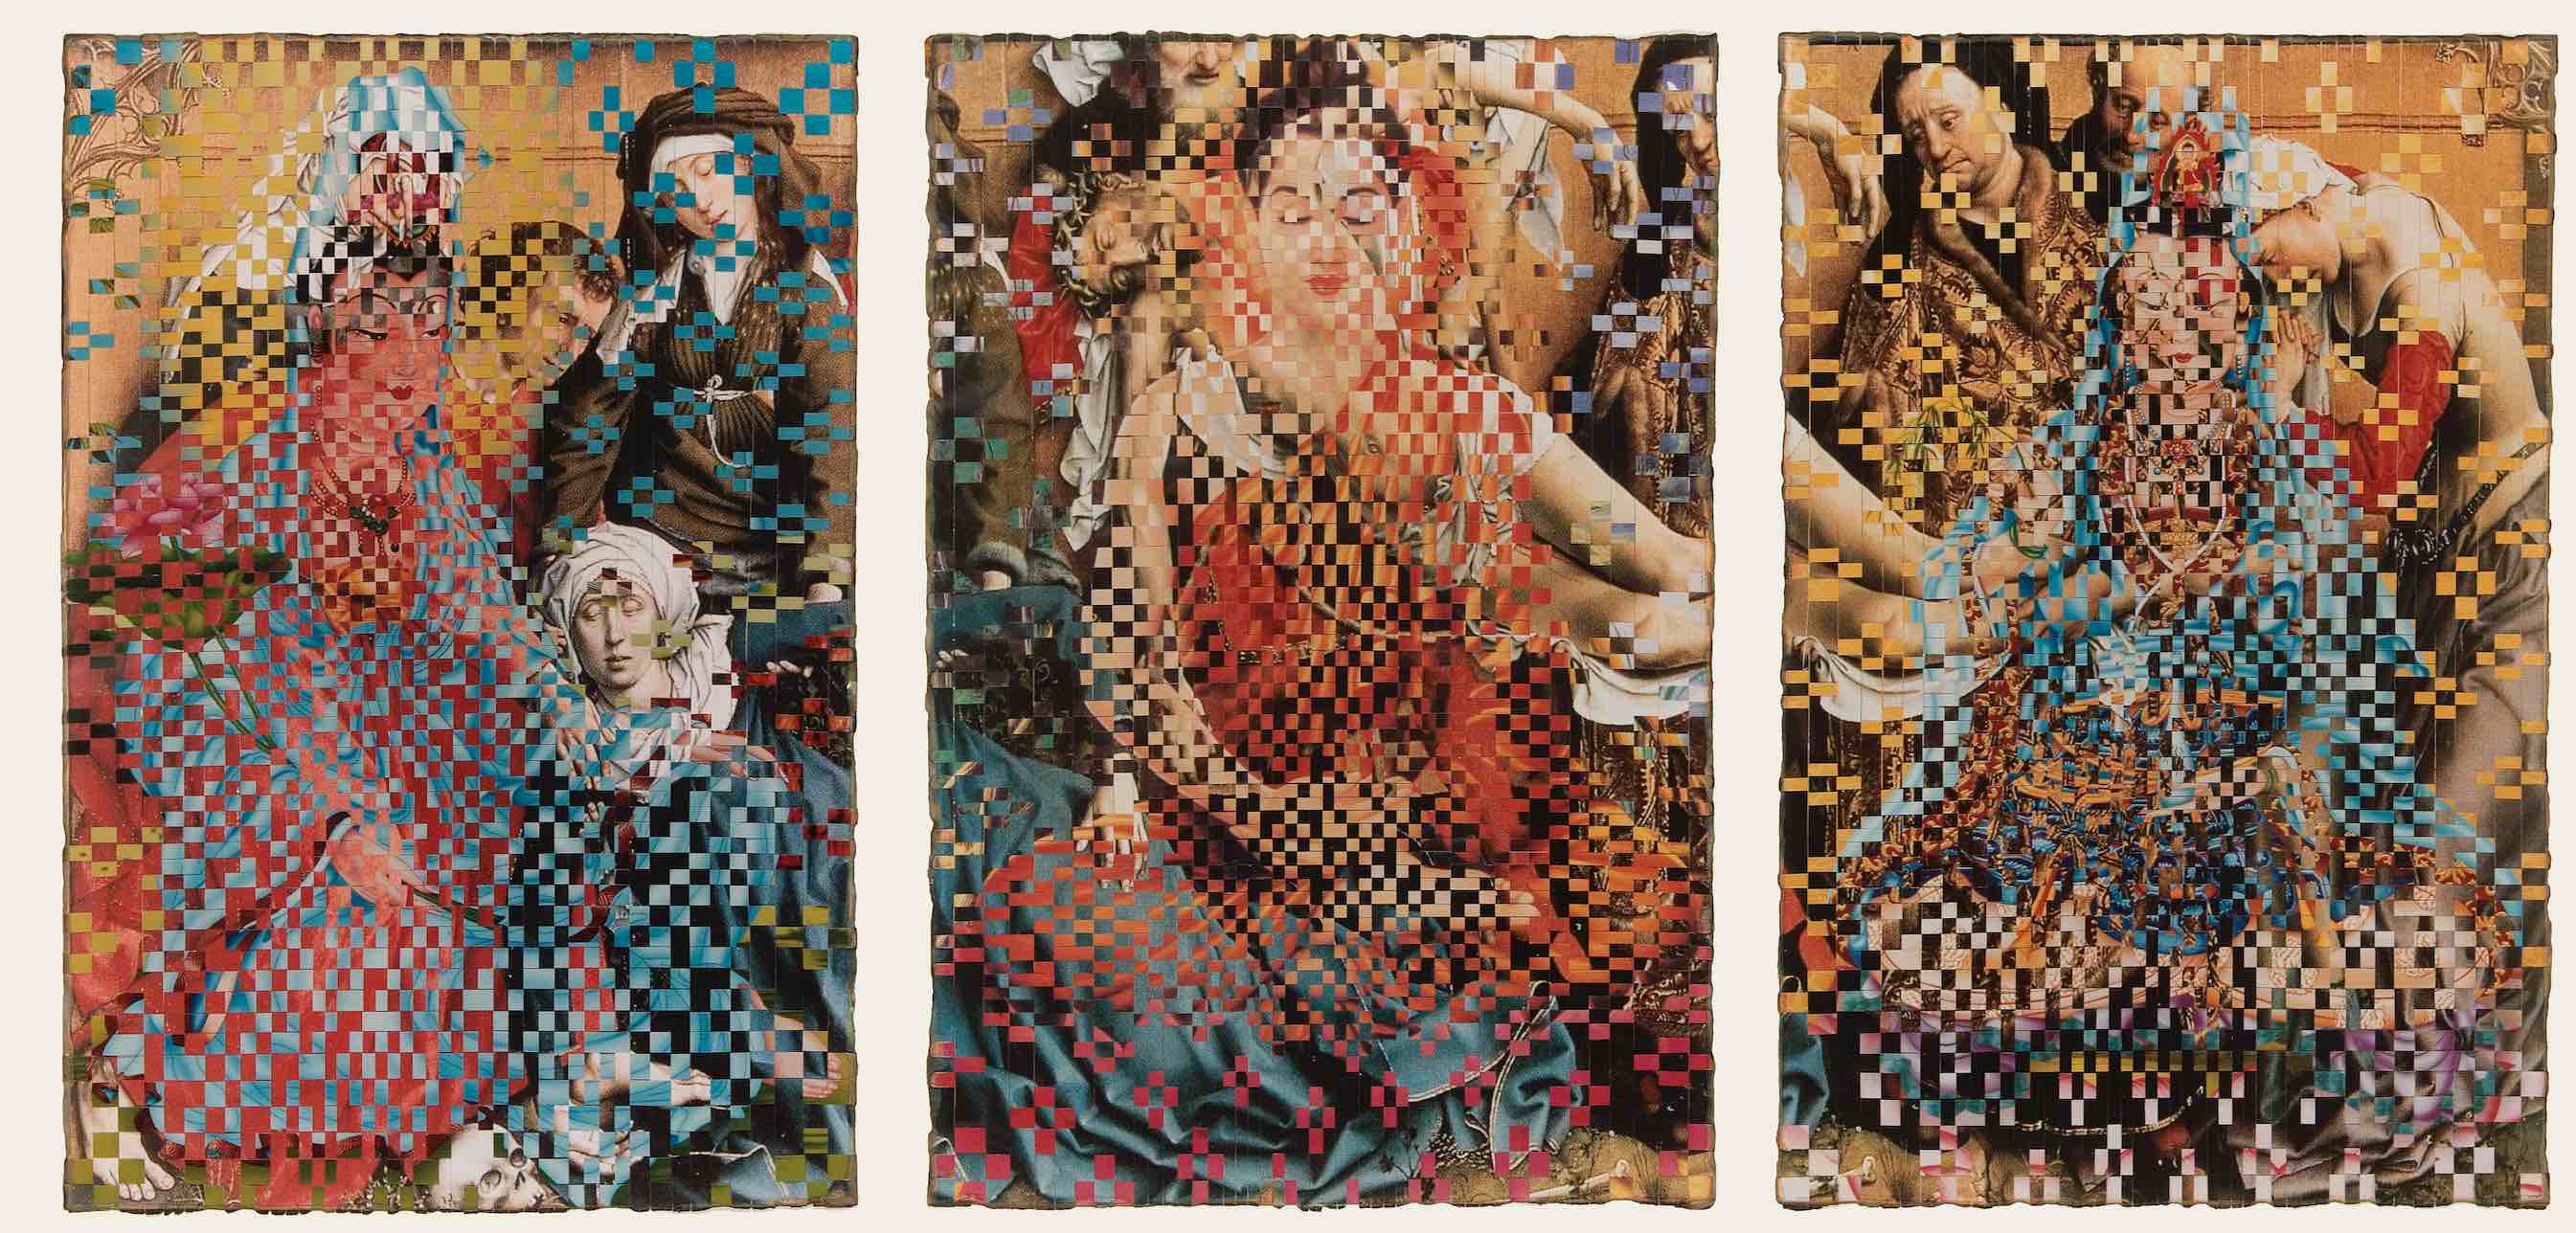 Dinh Q. Lê, Altarpiece #1, 2001. C-print with linen tape. Museum purchase. Triptych produced with traditional Vietnamese weaving methods. Art, Design & Architecture Museum; UC Santa Barbara.